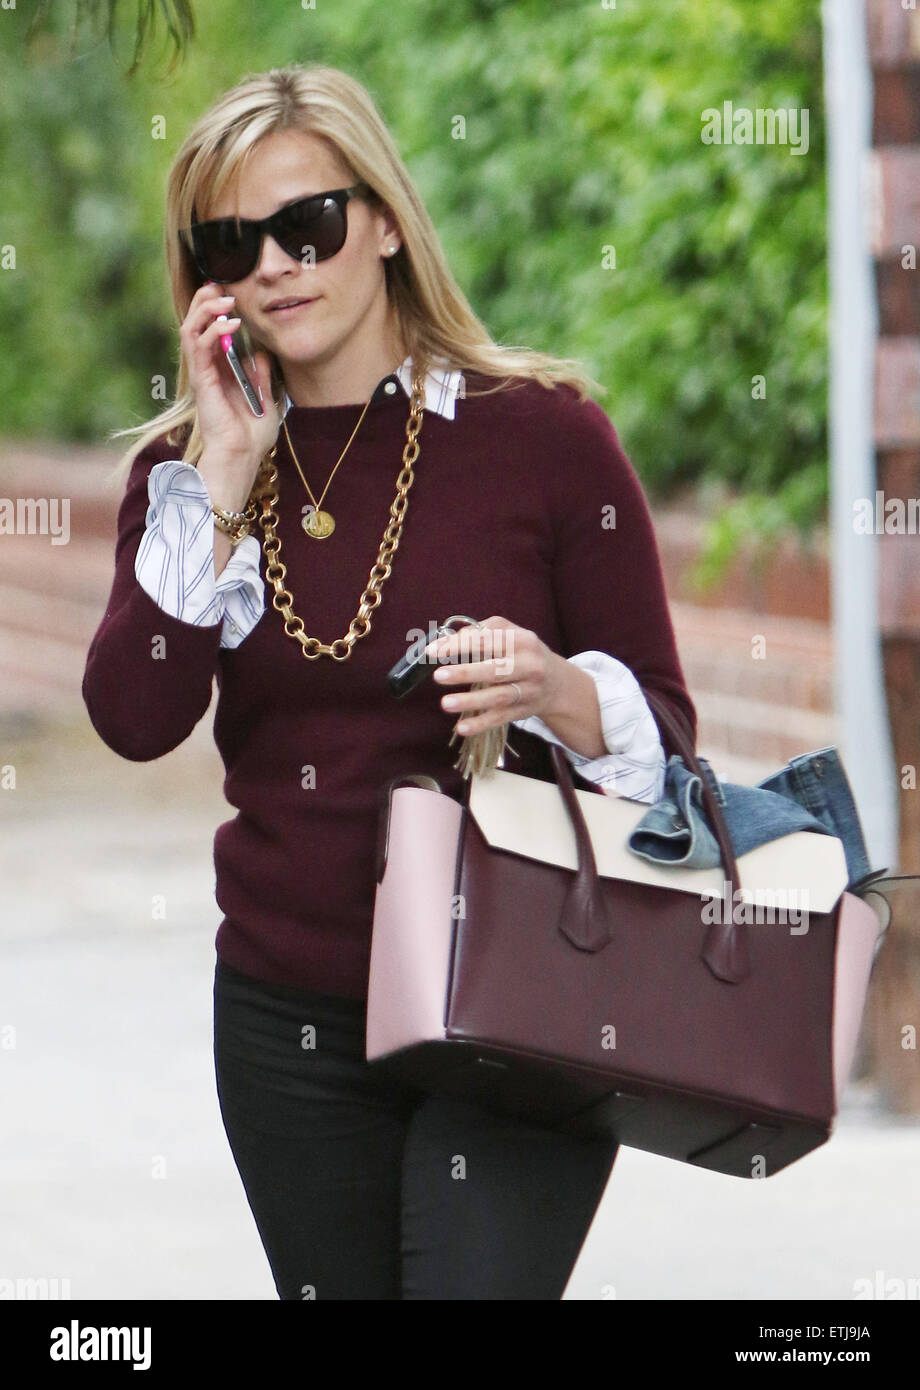 Reese Witherspoon spotted leaving her office in Beverly Hills  Featuring: Reese Witherspoon Where: Los Angeles, California, United States When: 27 Feb 2015 Credit: WENN.com Stock Photo